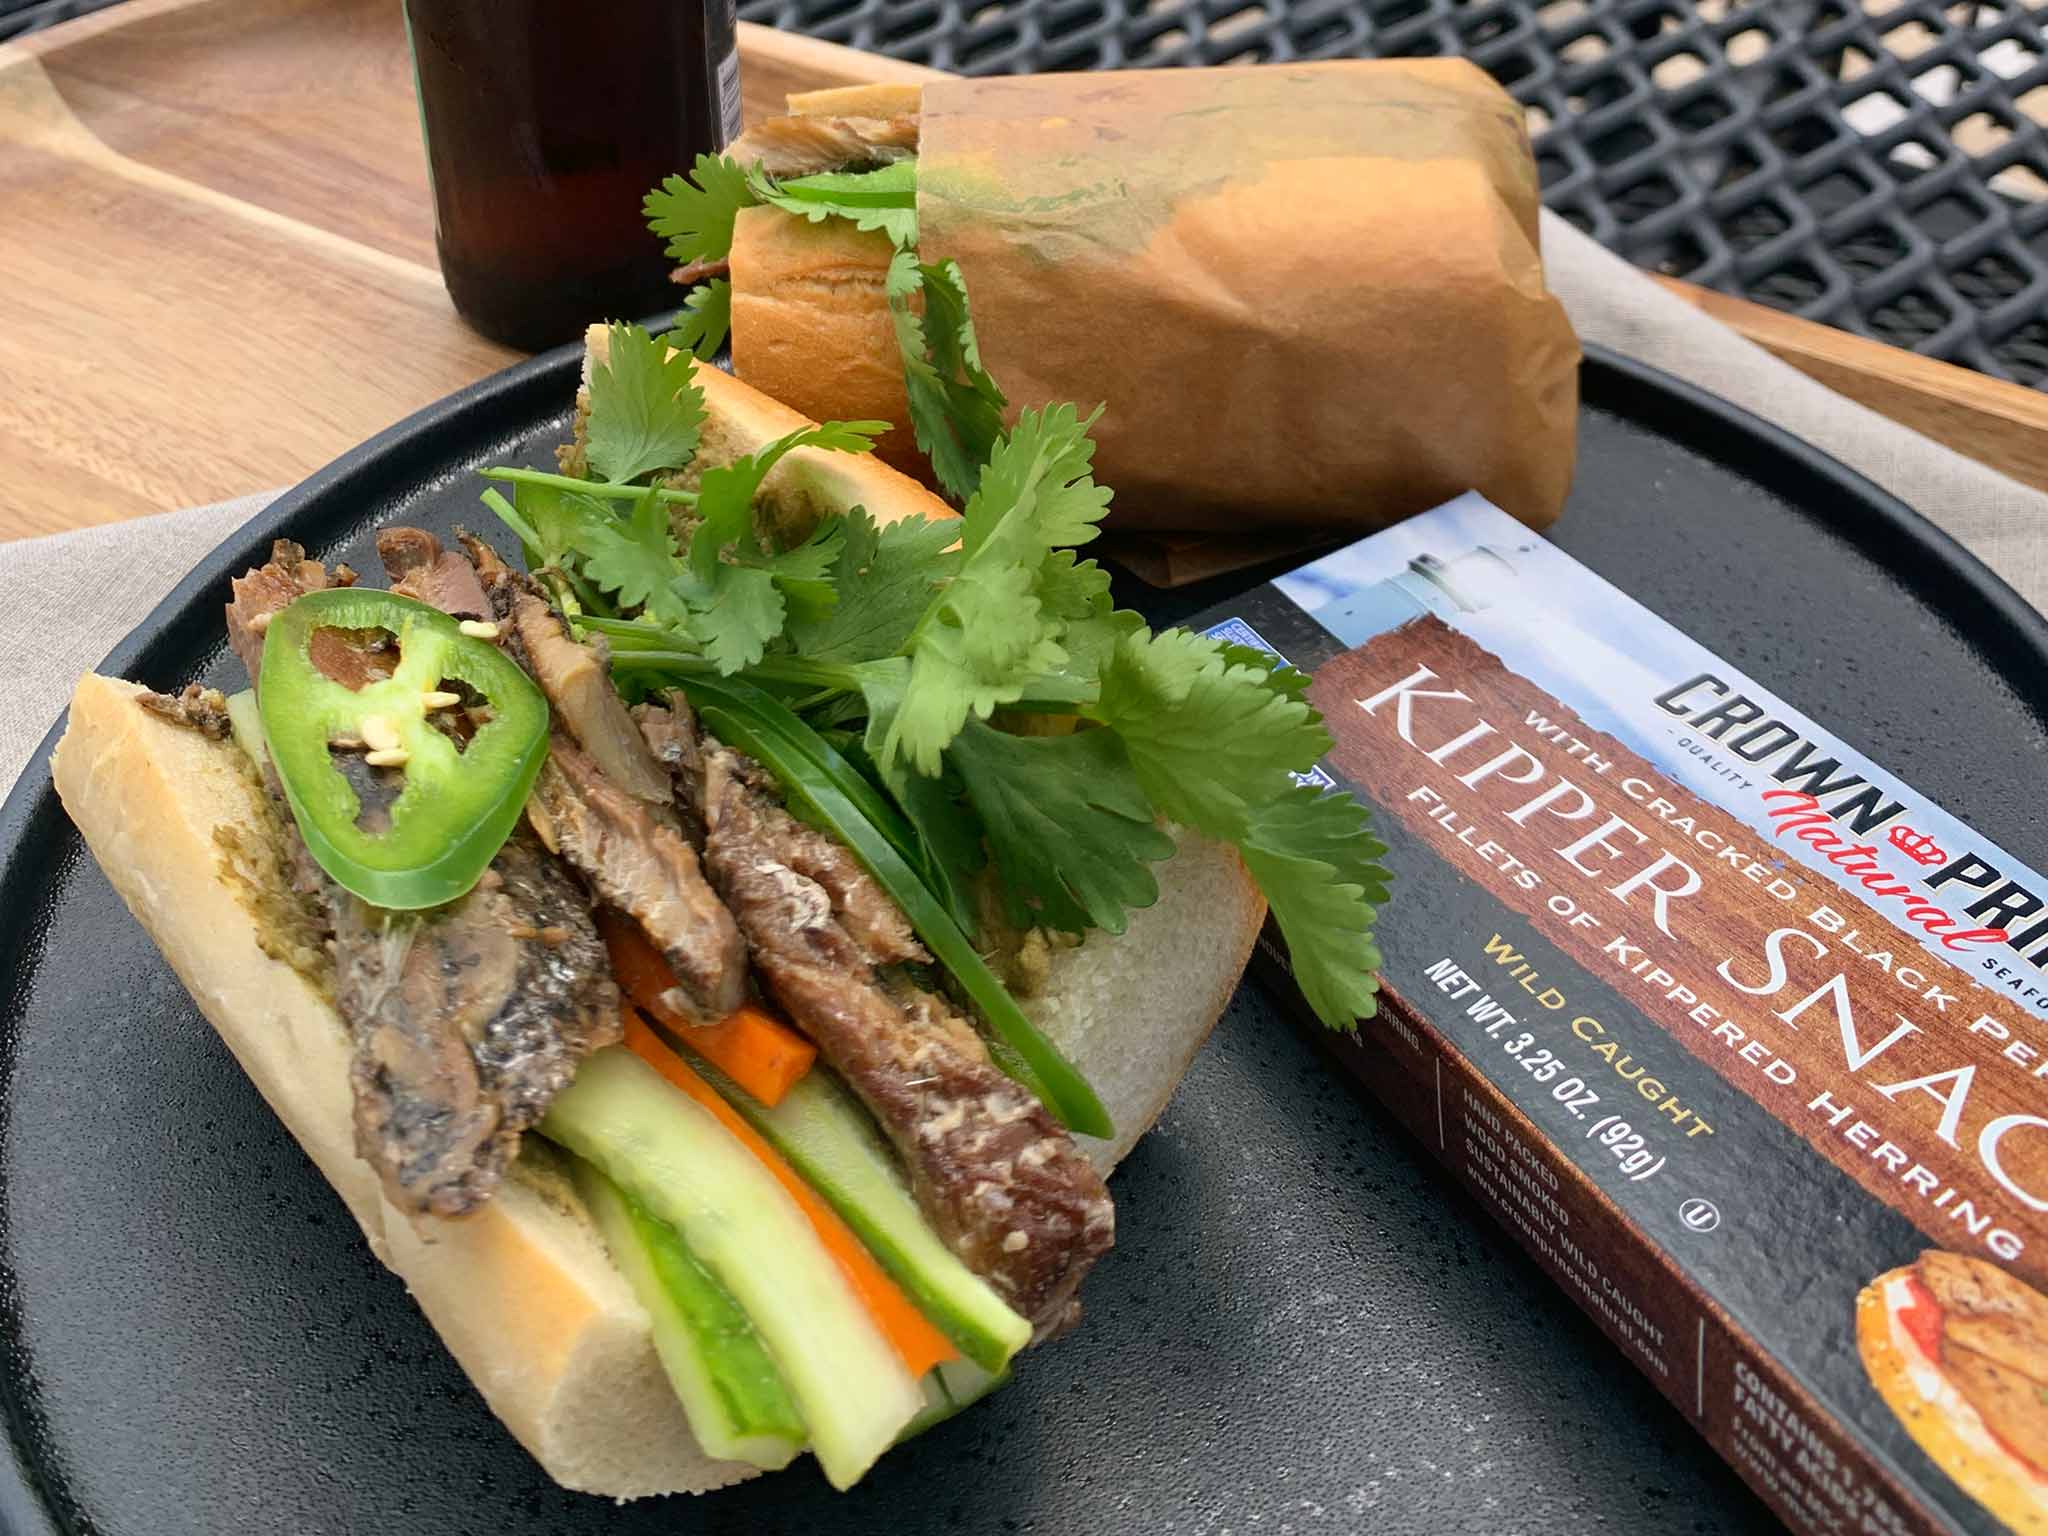 Kipper Banh Mi with Oyster Pate